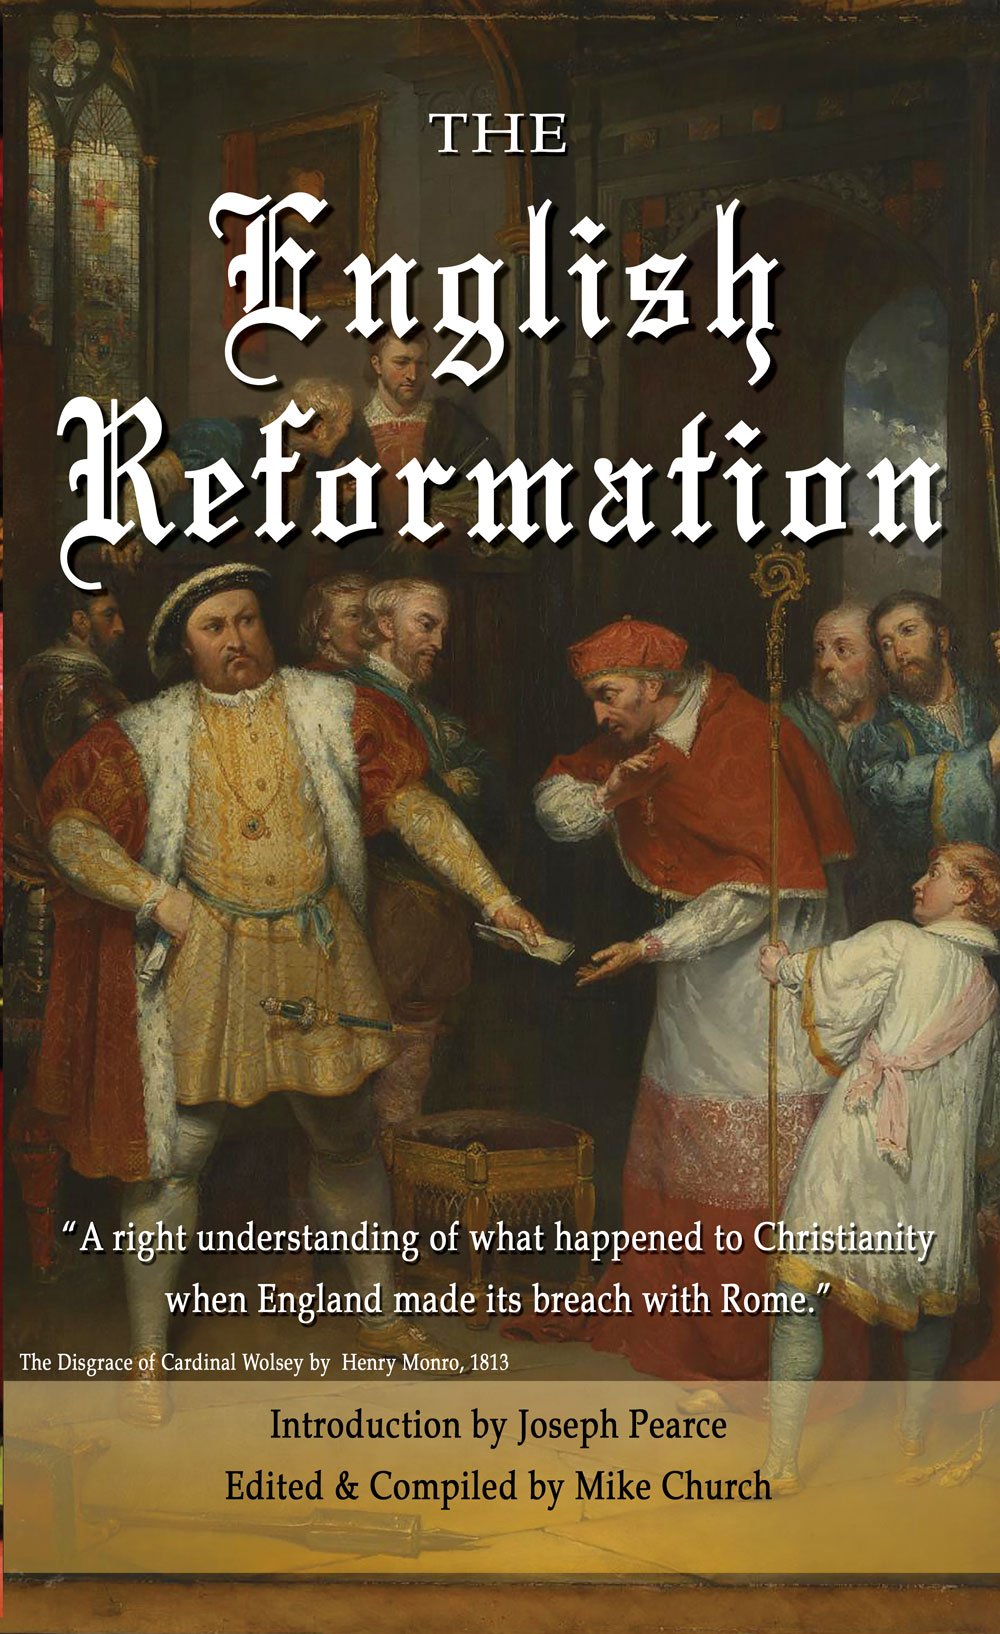 Return to Order Lessons From History: A Look at the English Reformation